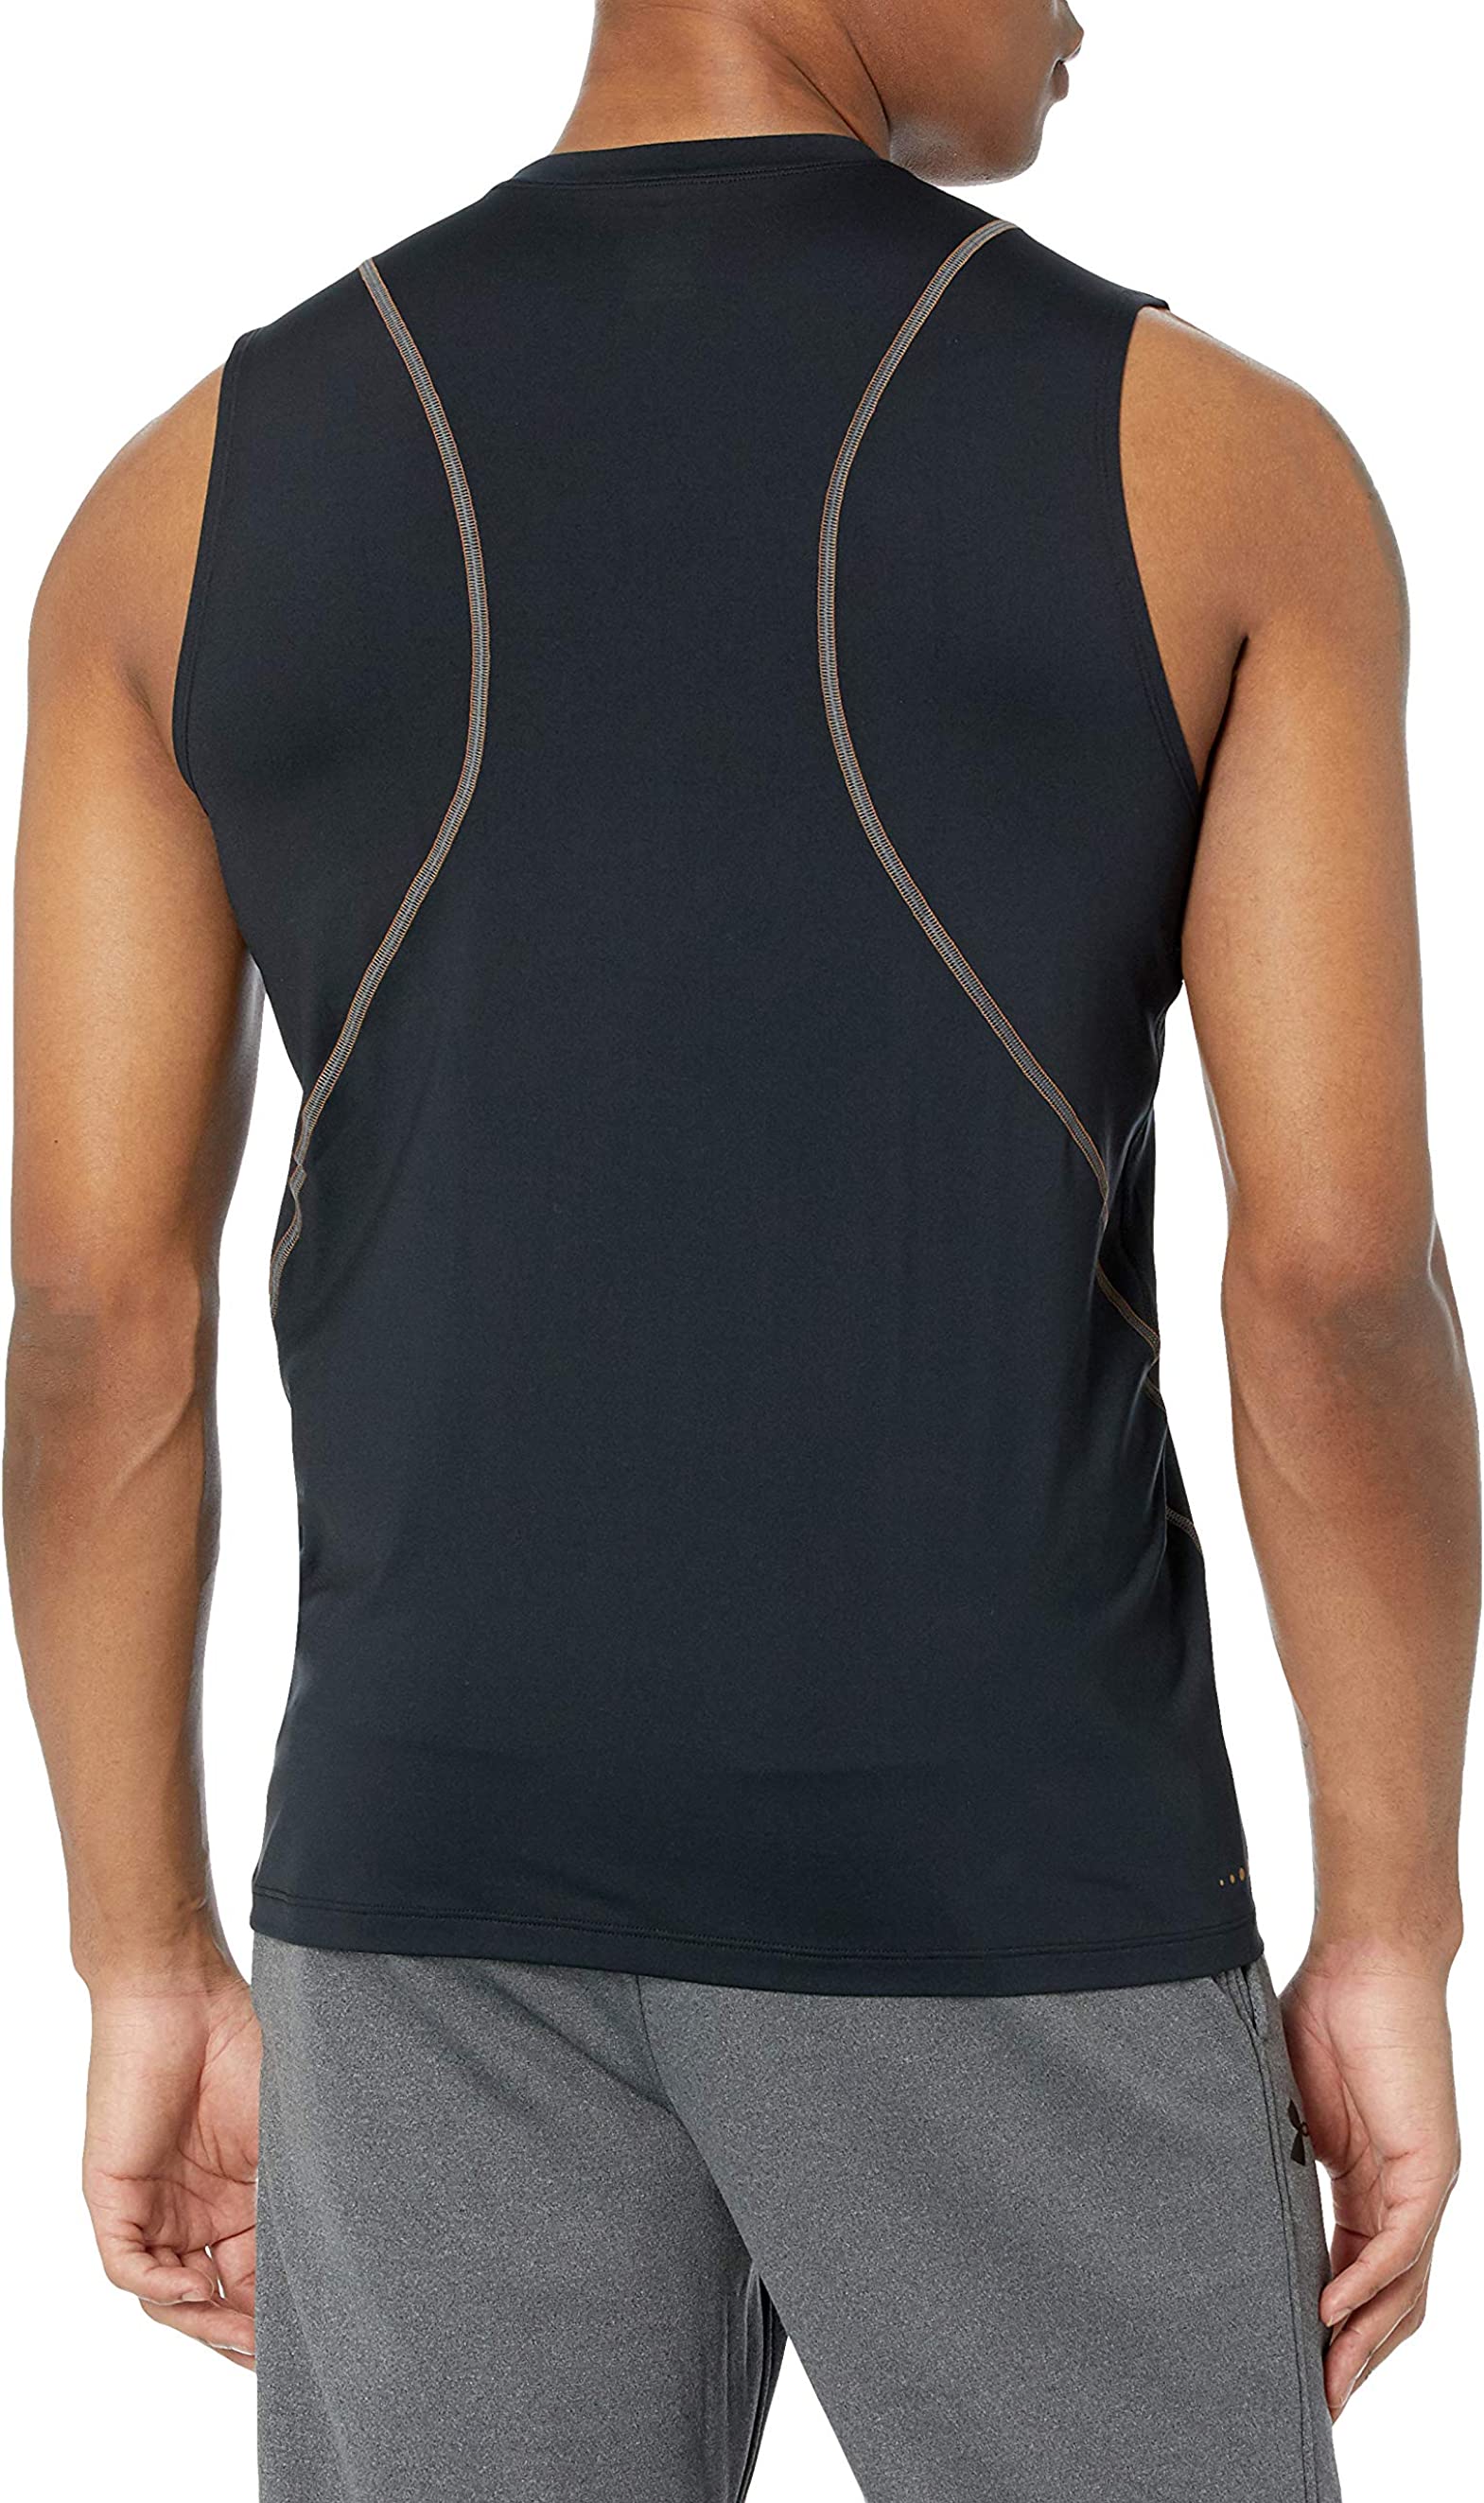 Tommie Copper Mens Performance Victory Active Fit Sleeveless Crew Neck T-Shirt,Black,Large